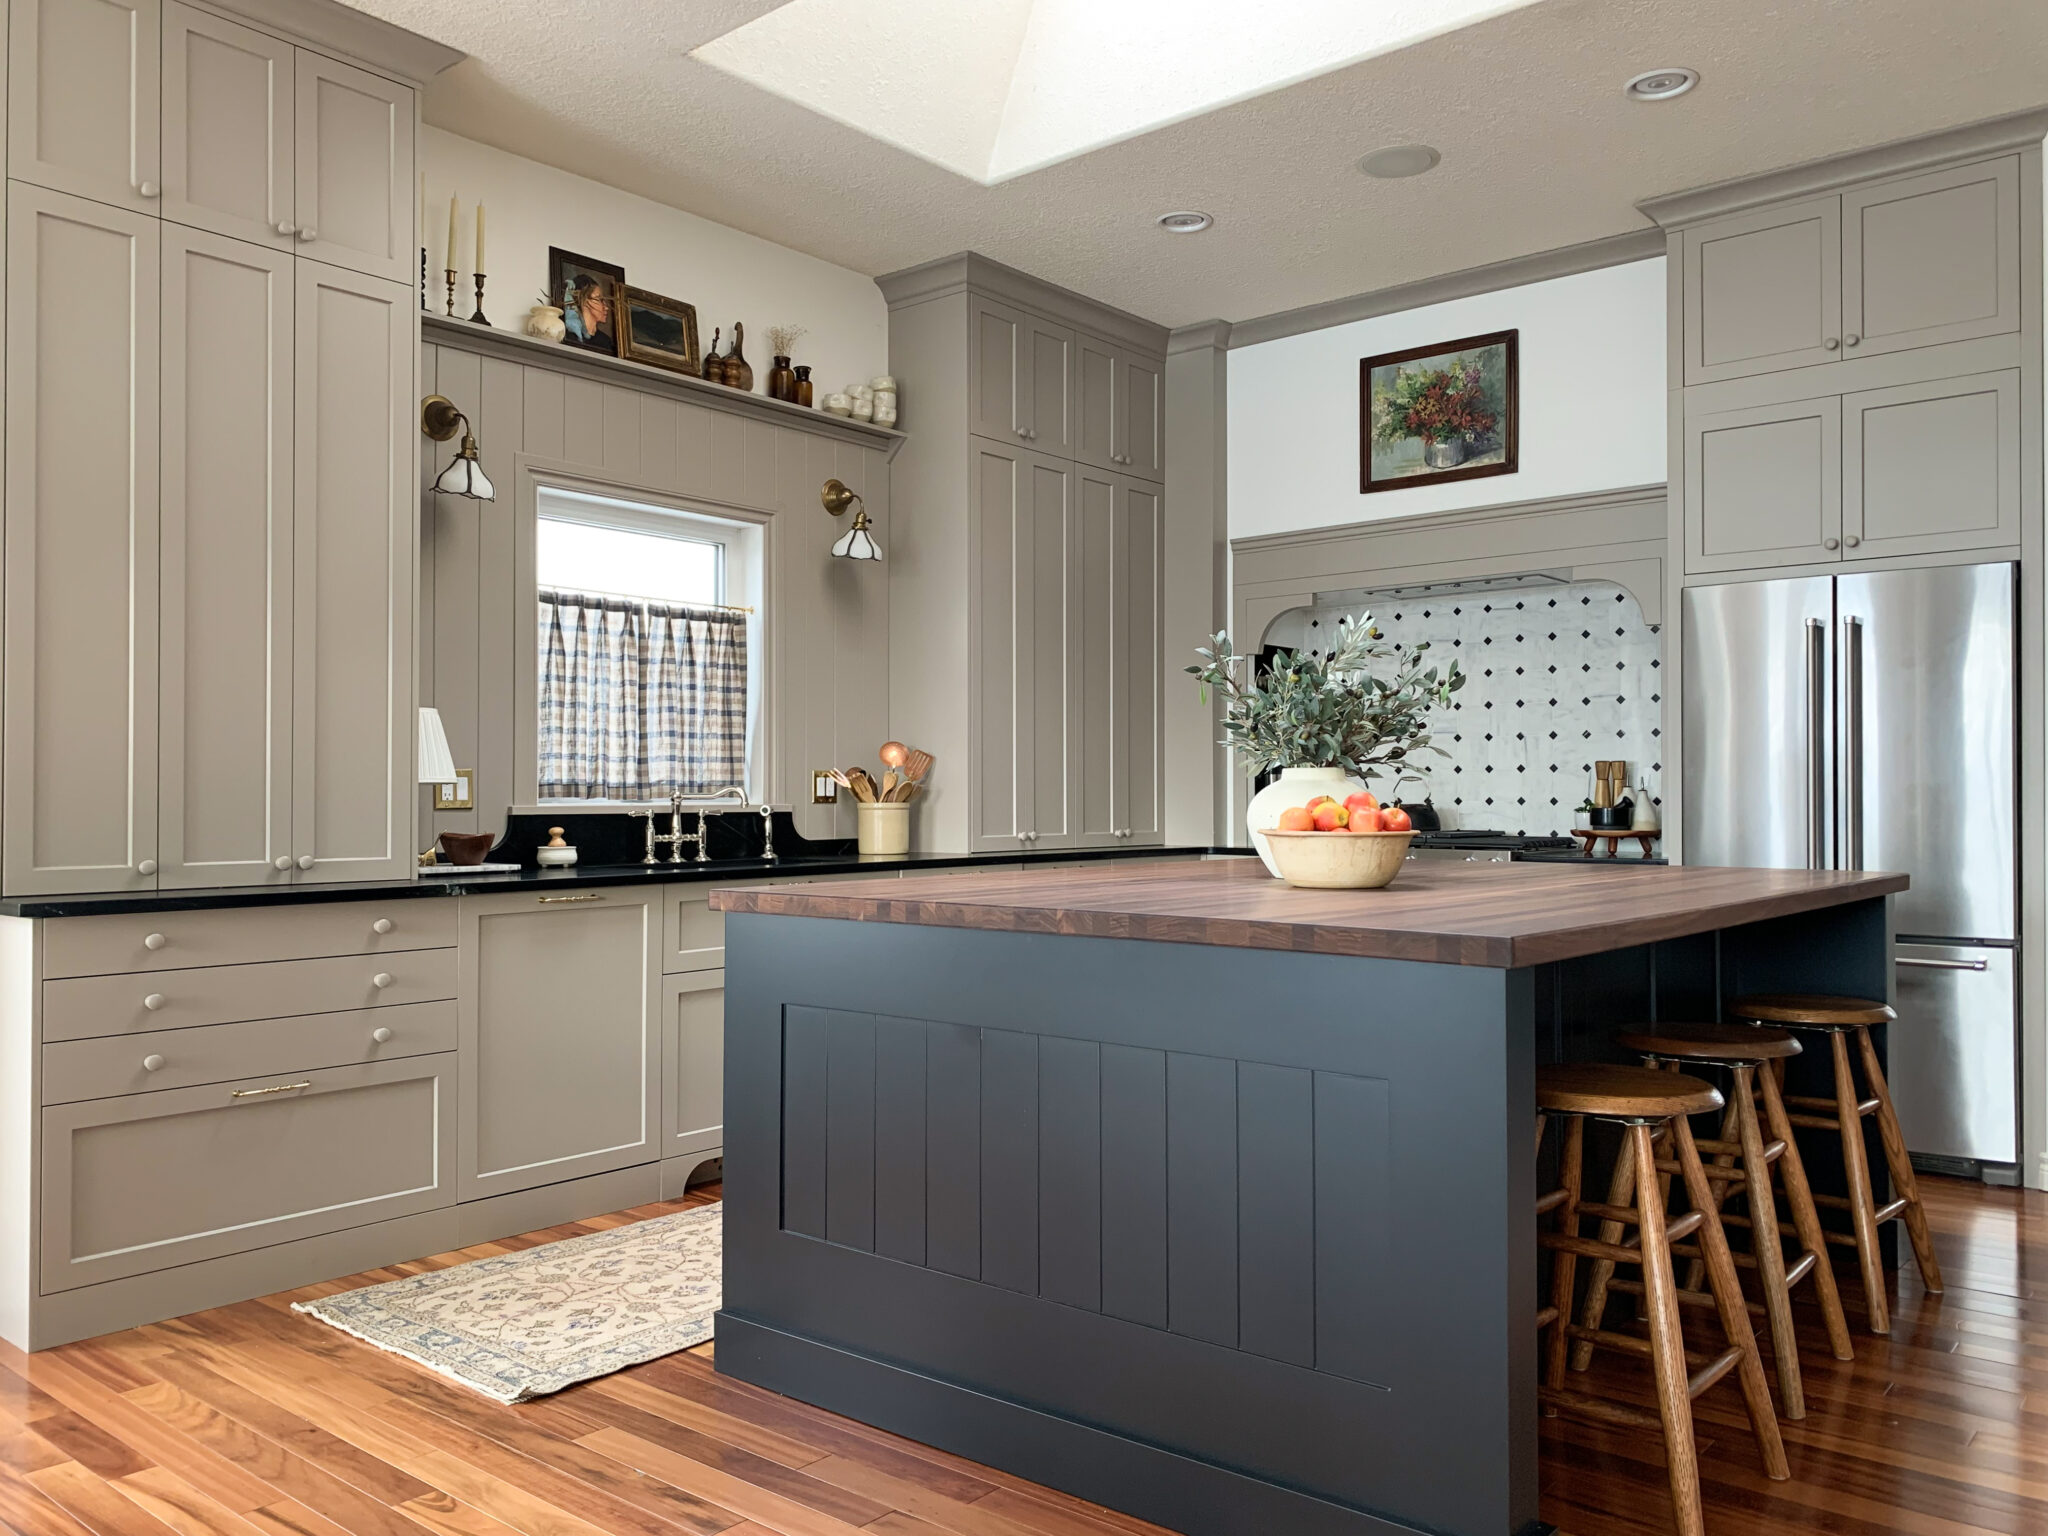 Taupe cabinets with soapstone counters and a black kitchen island  with a butcher block counter. This kitchen island does not match the cabinets or perimeter countertop and it's absolutely beautiful.